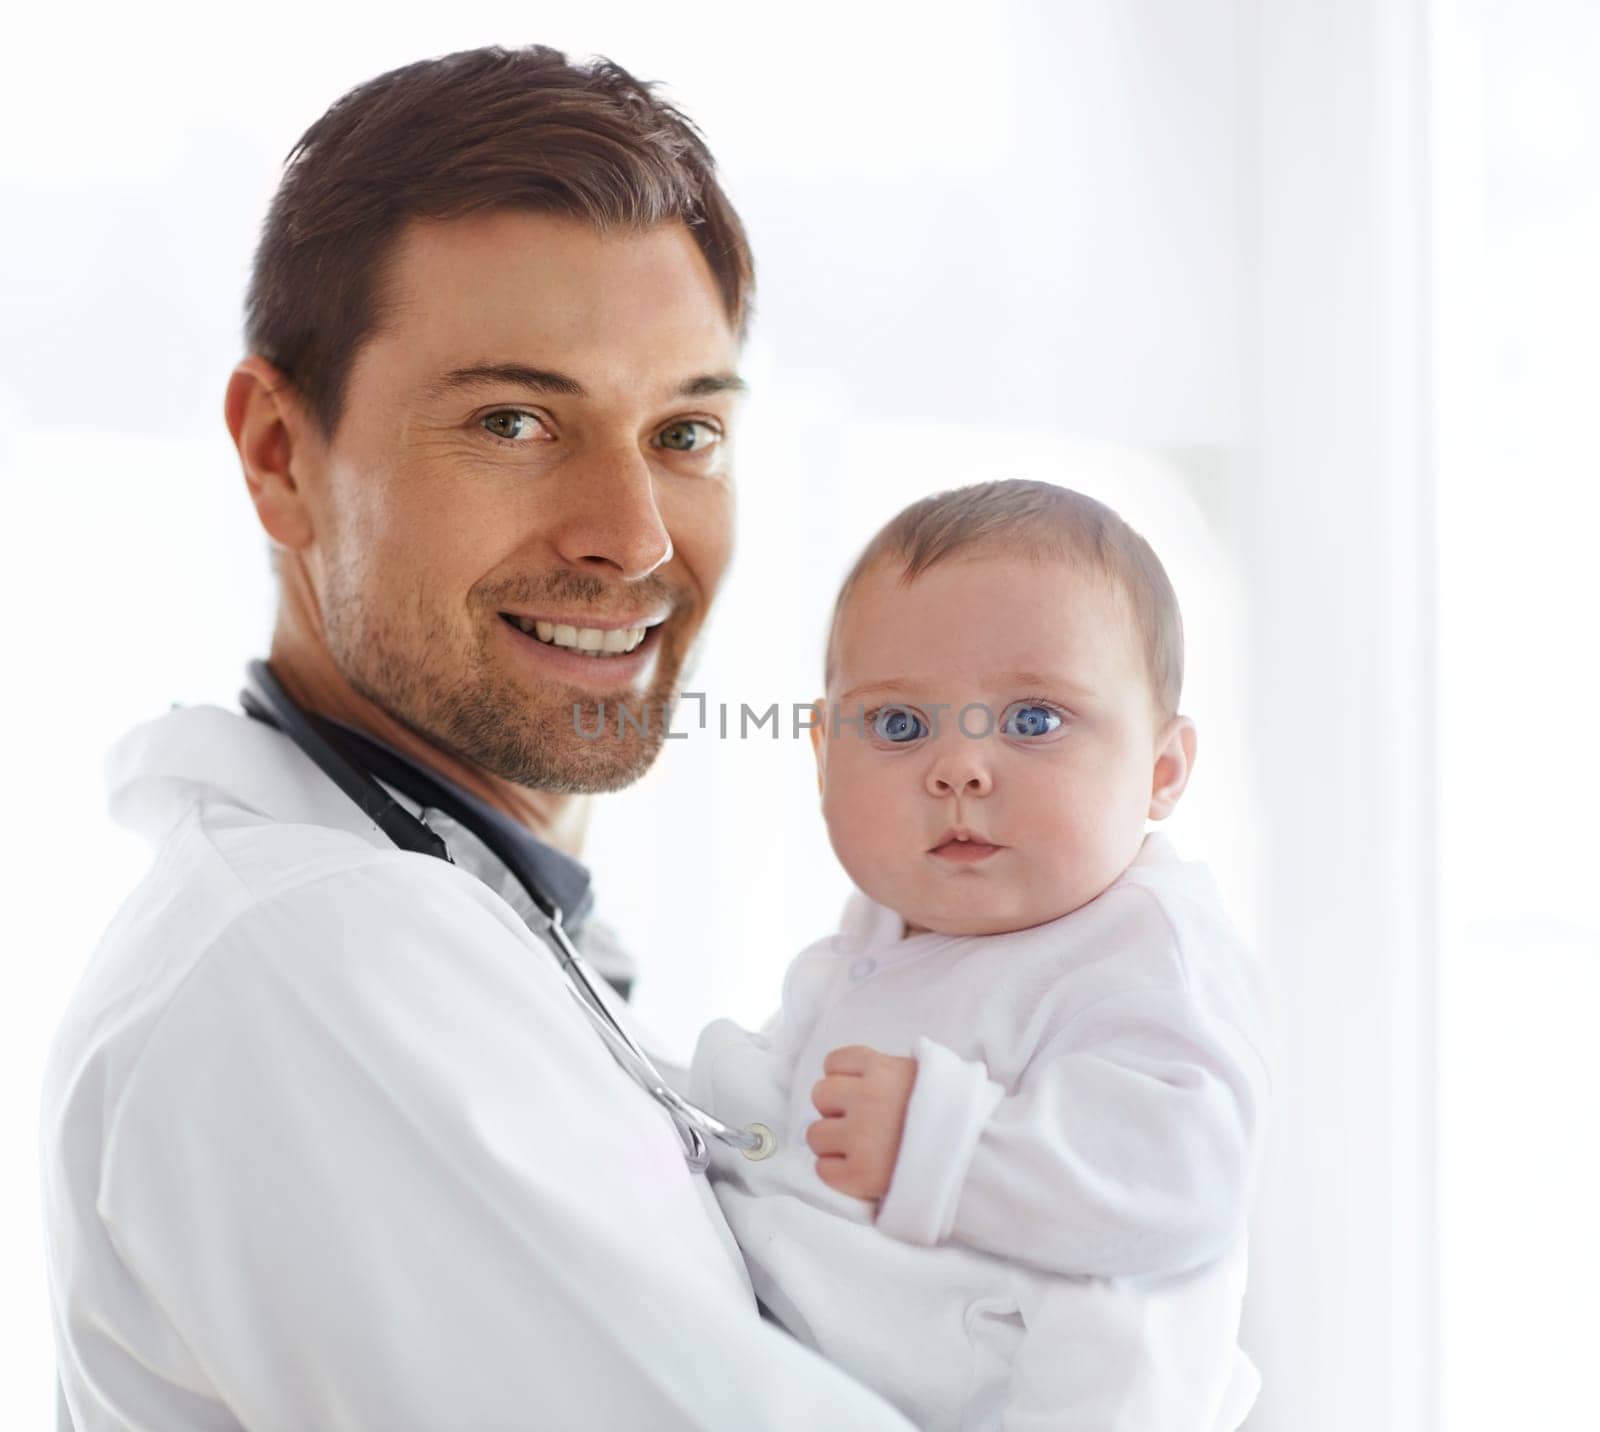 Portrait of happy man, pediatrician and baby for medical assessment, growth support and healthcare of children. Newborn kids, doctor and smile in clinic, hospital and consulting service in pediatrics.